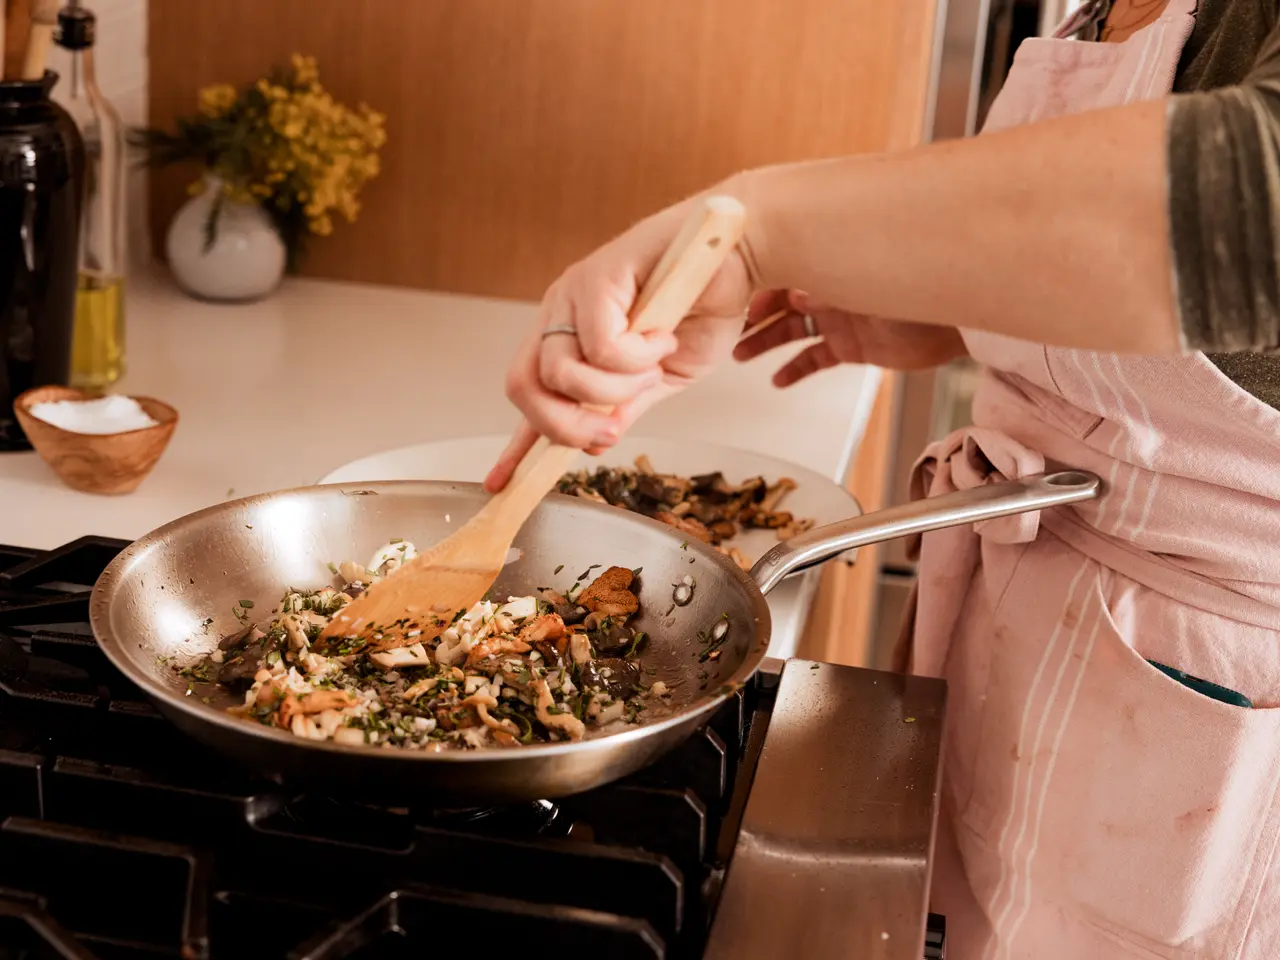 A person in a pink apron is sautéing food in a stainless steel frying pan on a stove.